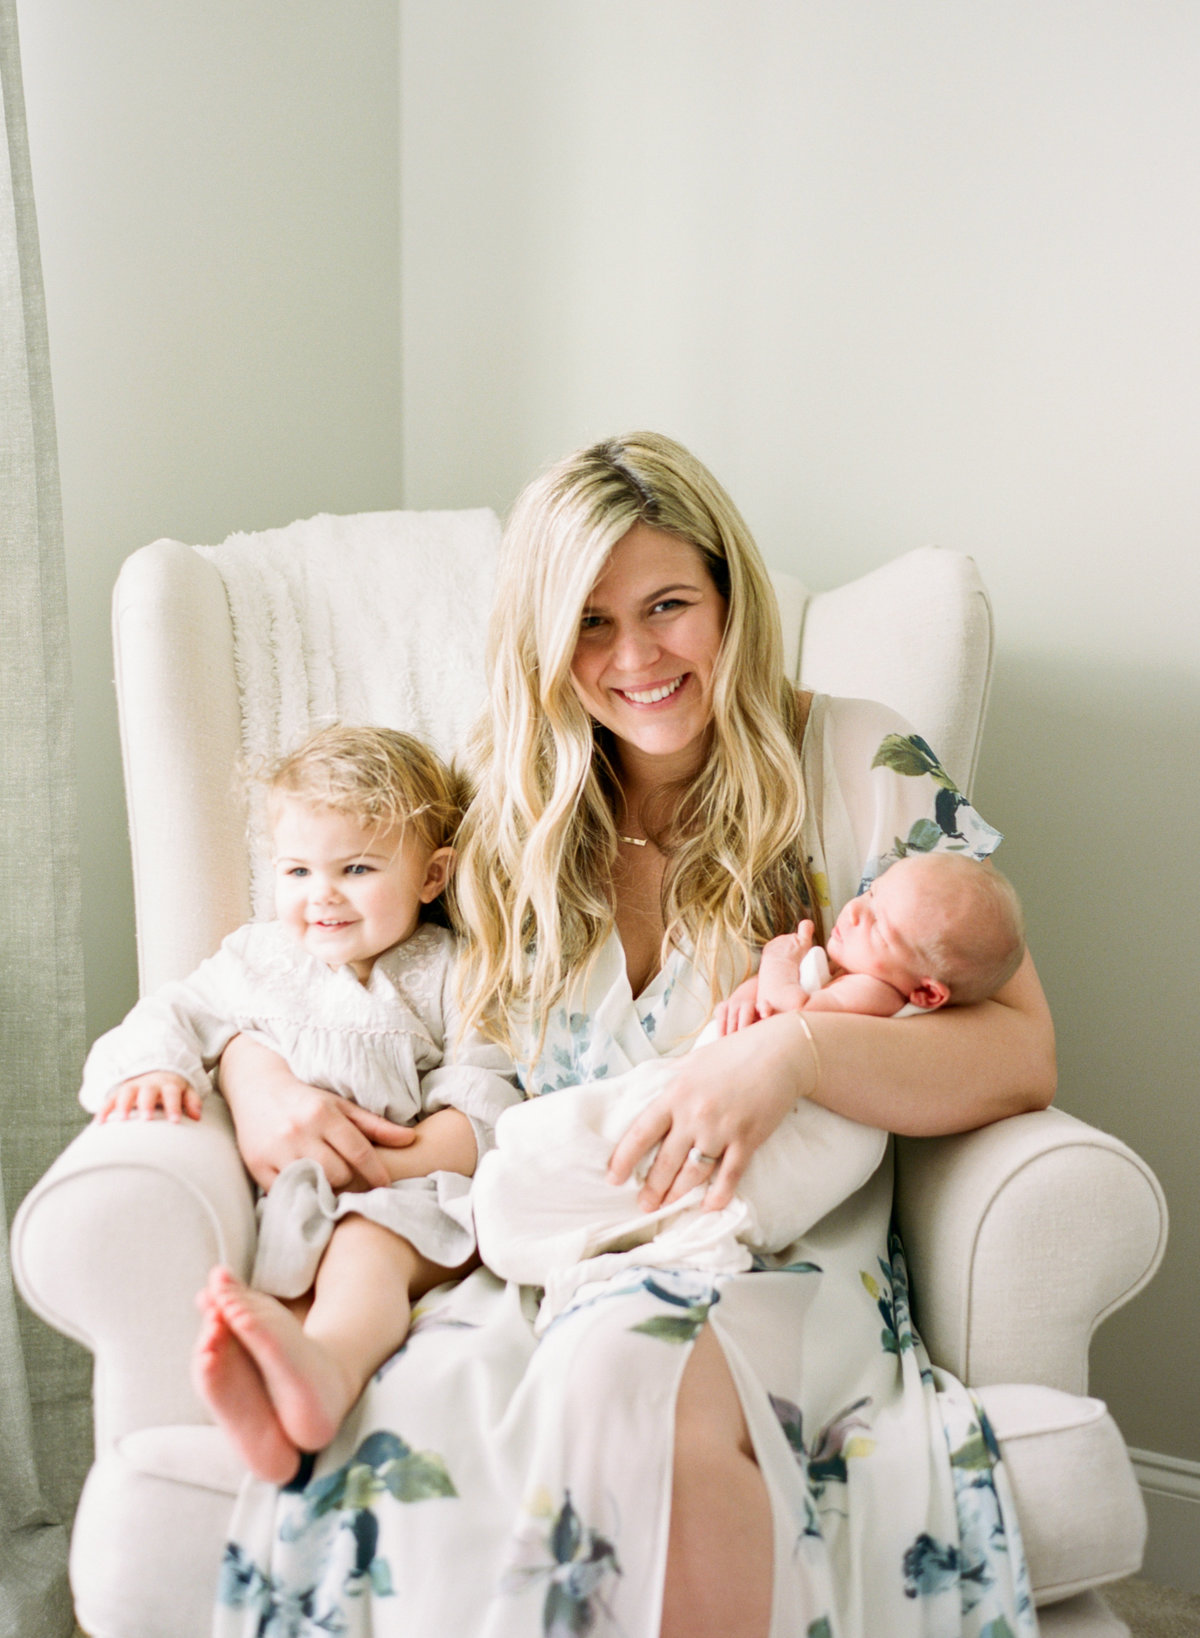 Mom sits in a rocker and smiles while holding her newborn and toddler during a Raleigh newborn session. Photographed by Raleigh Newborn Photographer A.J. Dunlap Photography.